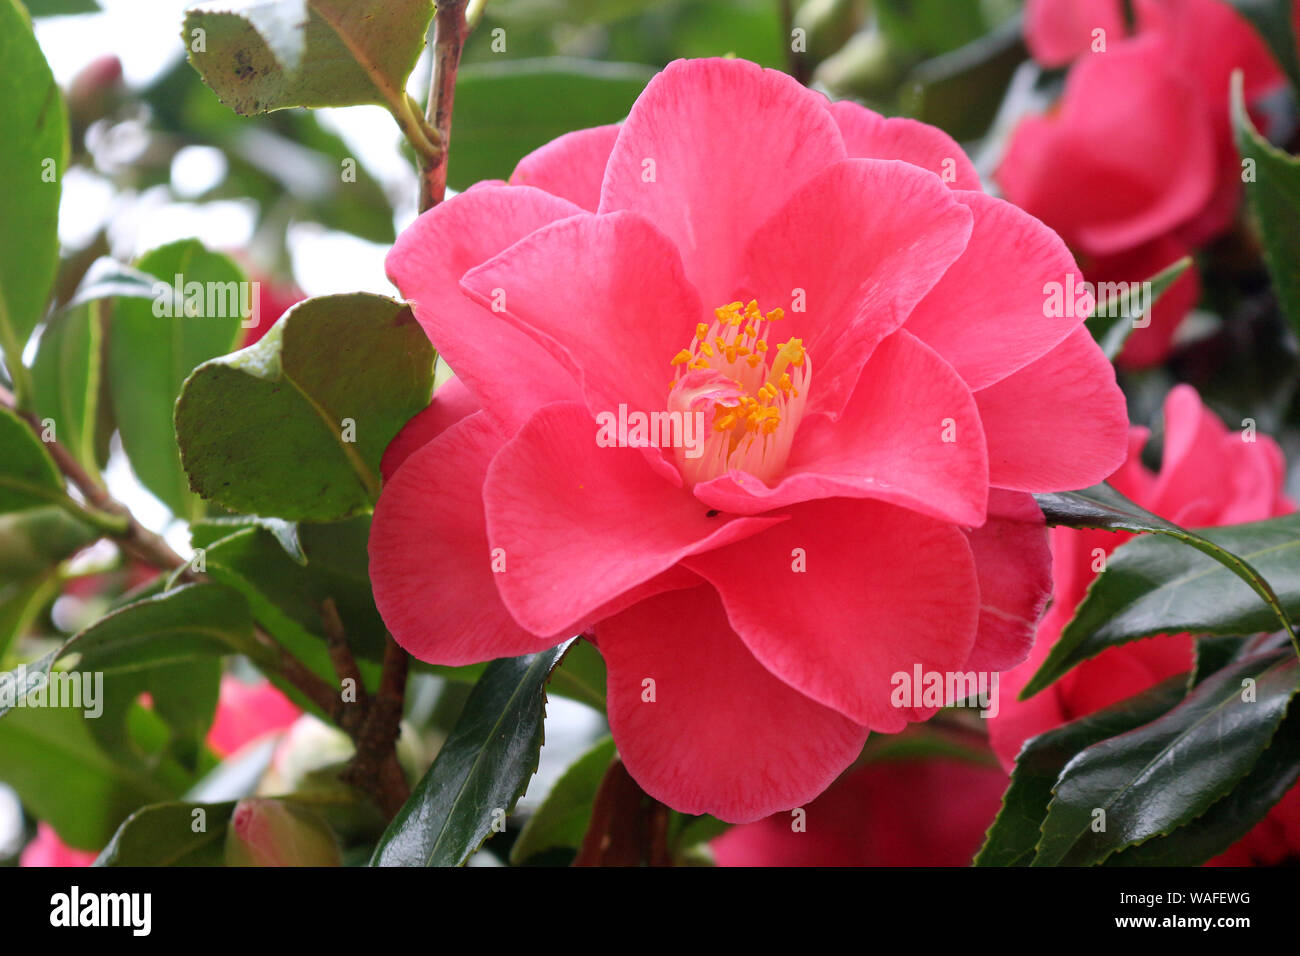 A Pink Japanese Camellia or Camellia Japonica Stock Photo